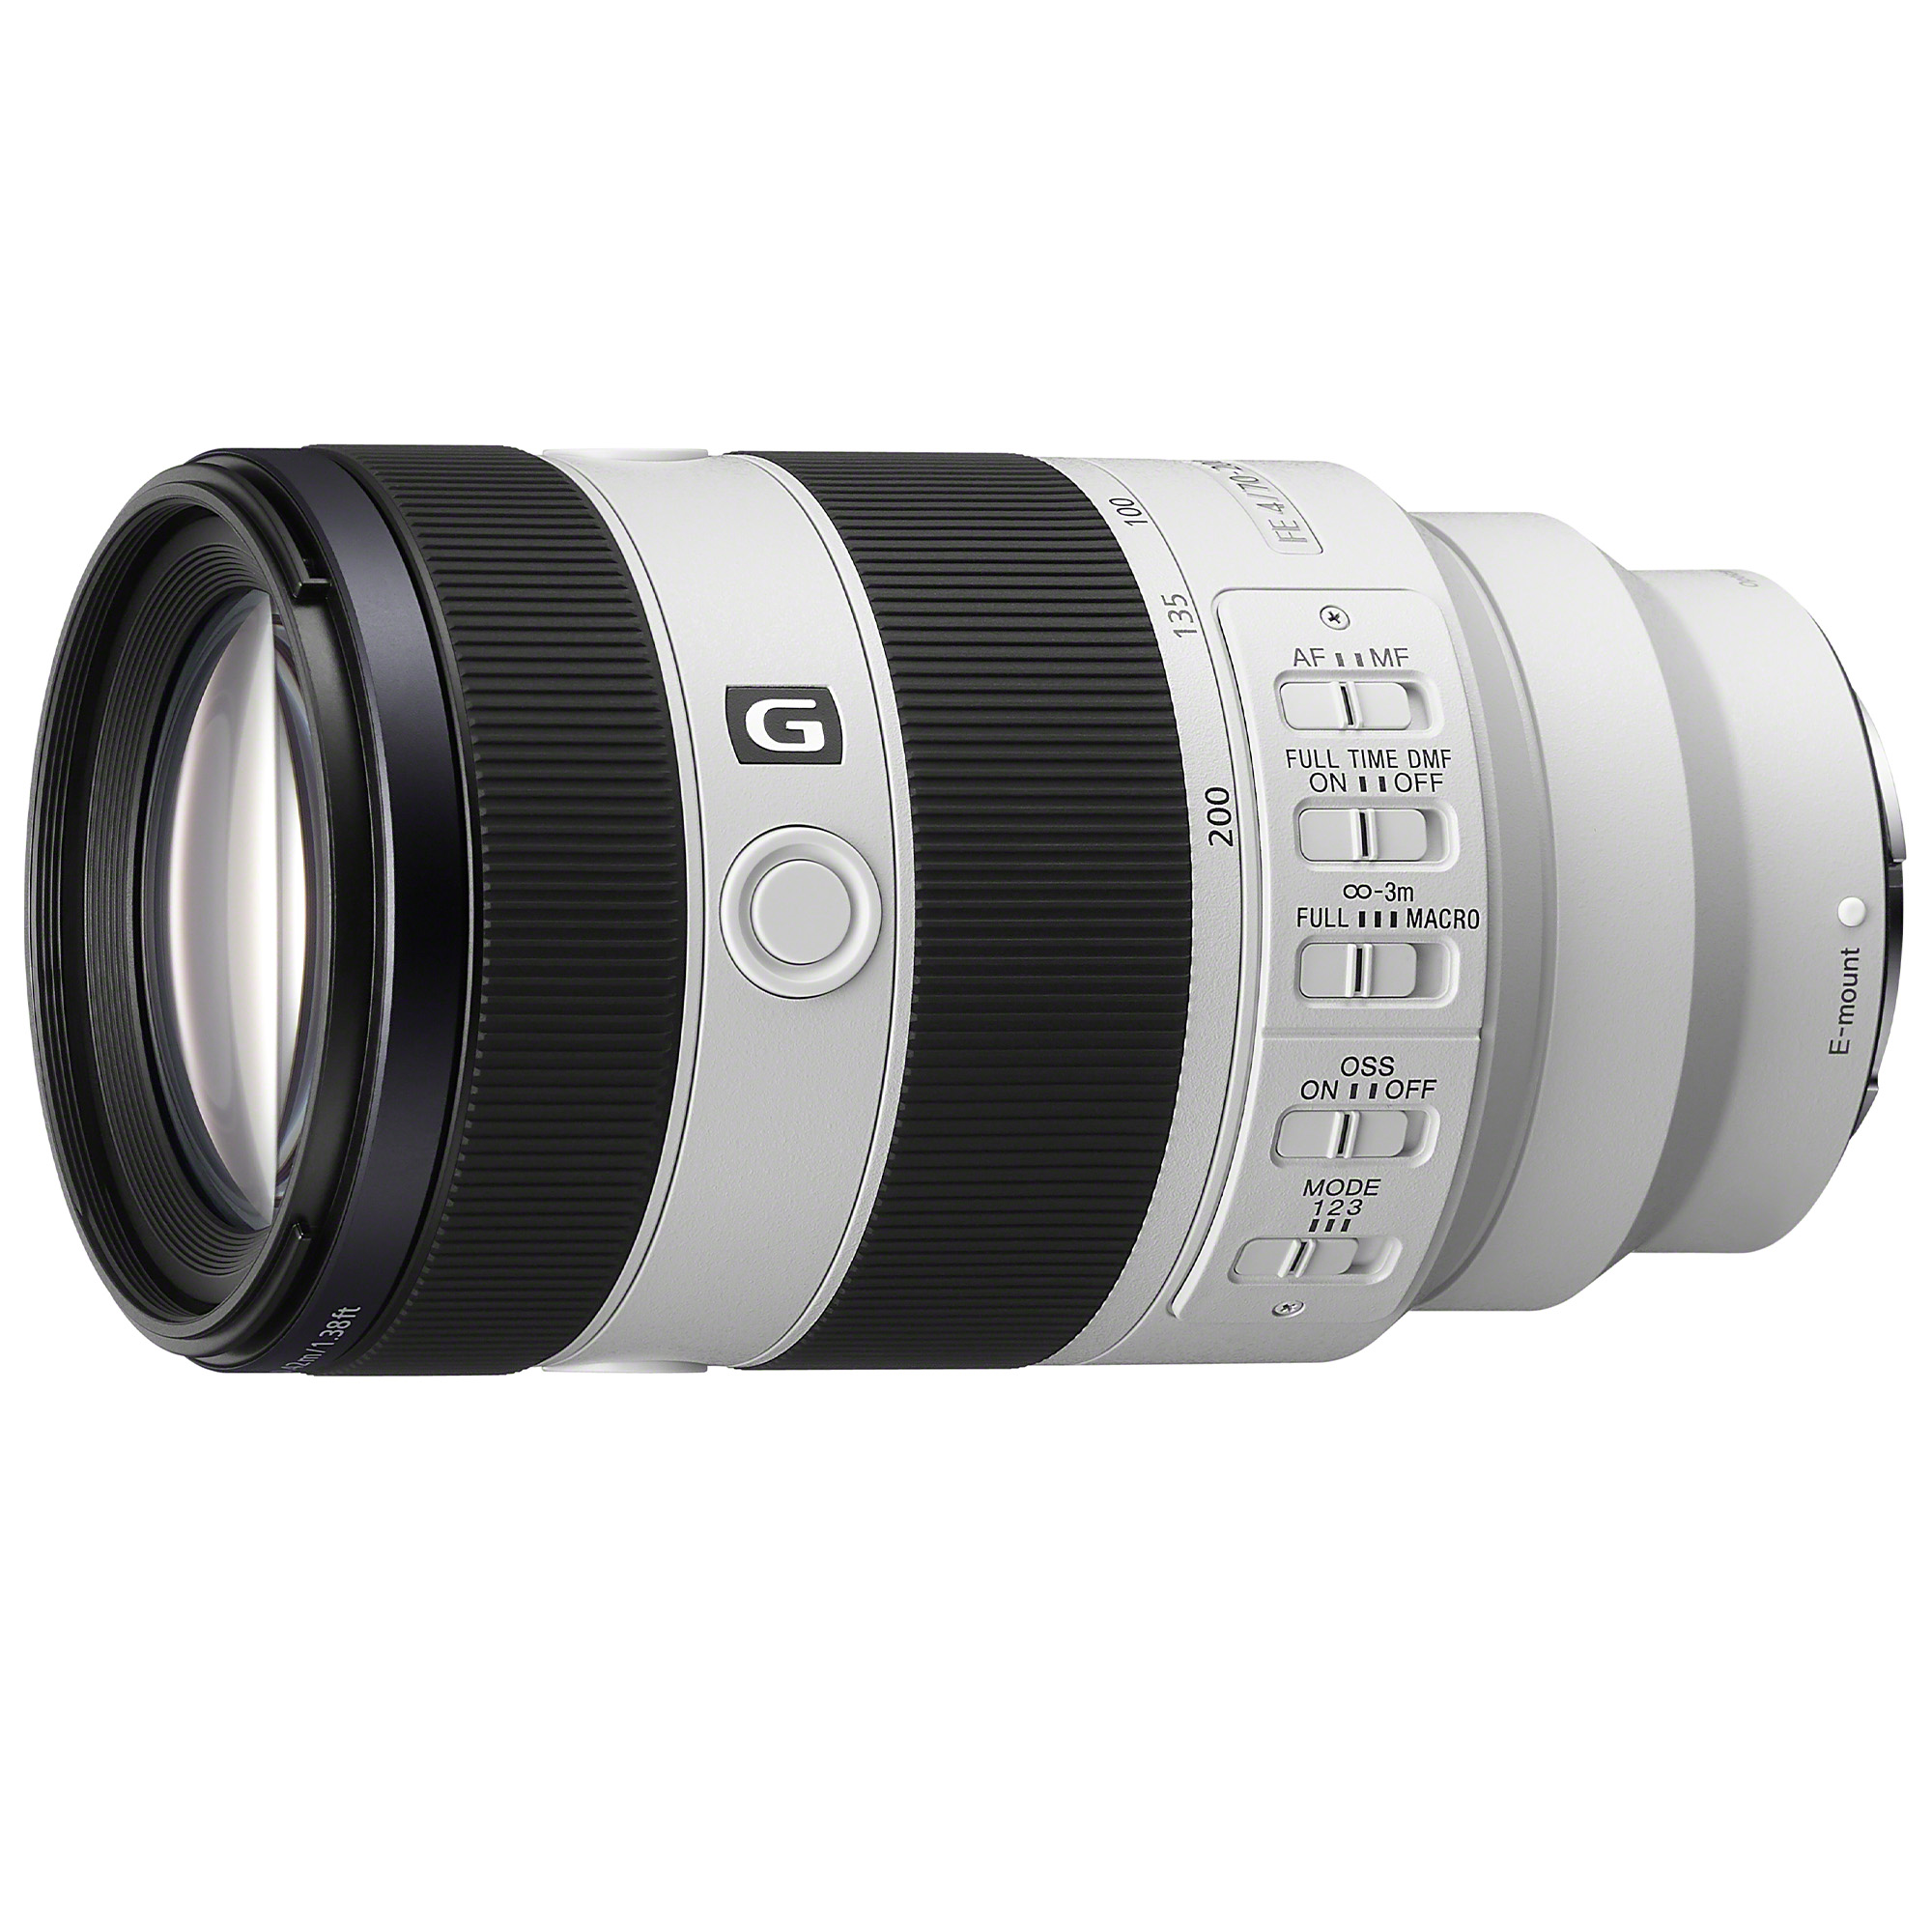 Compact & lightweight telephoto zoom lens.